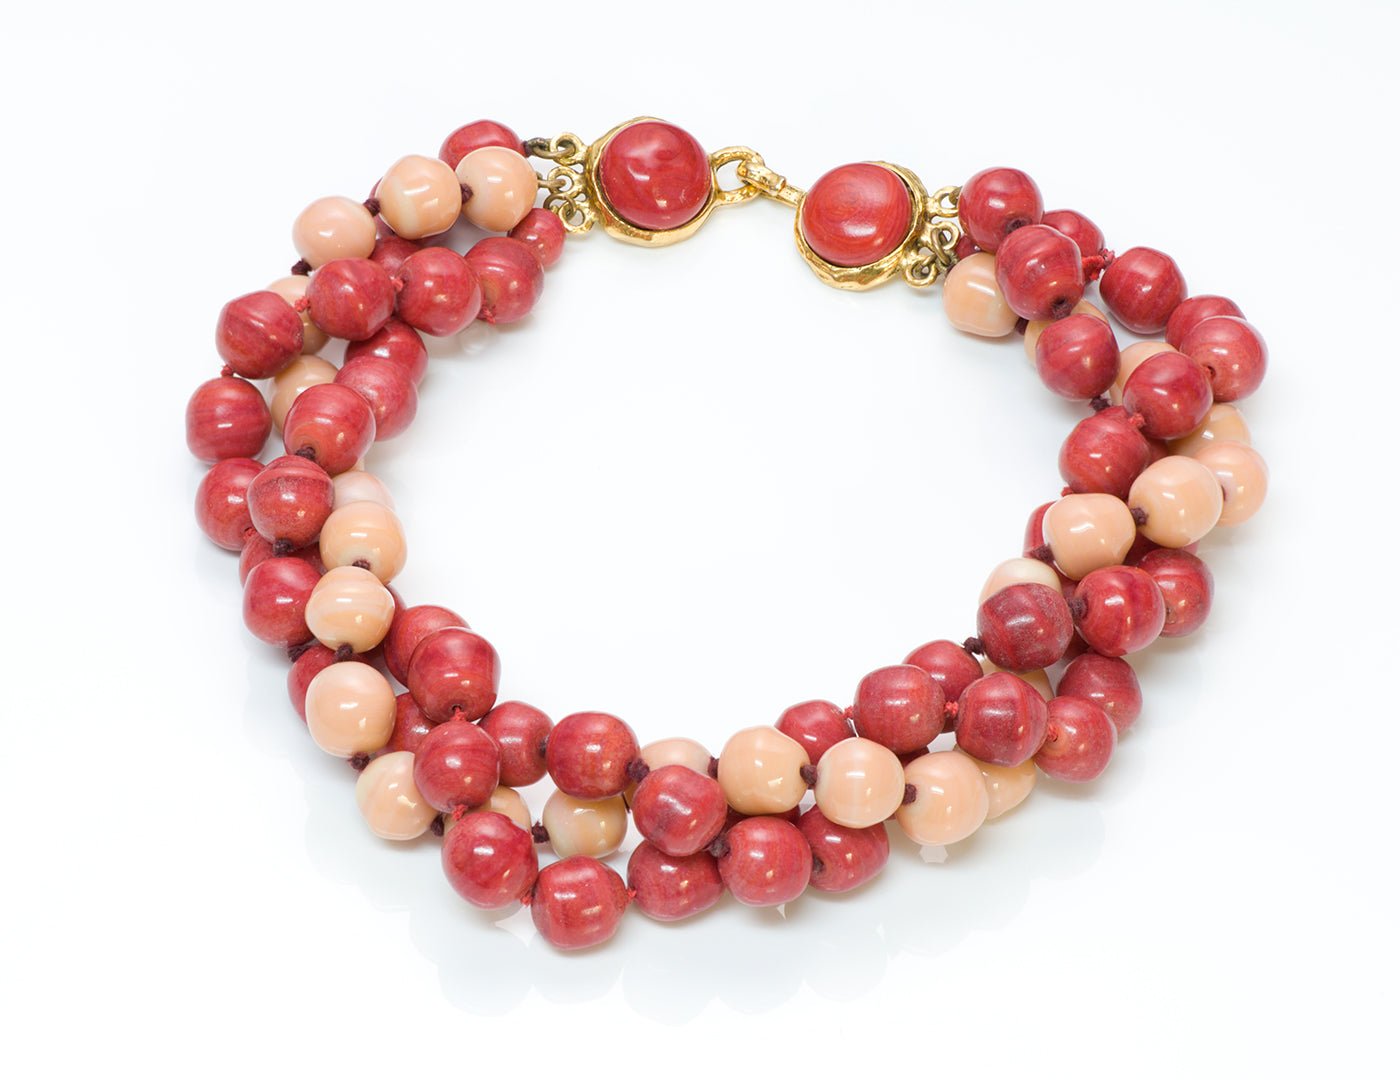 Chanel Gripoix Glass Bead Necklace